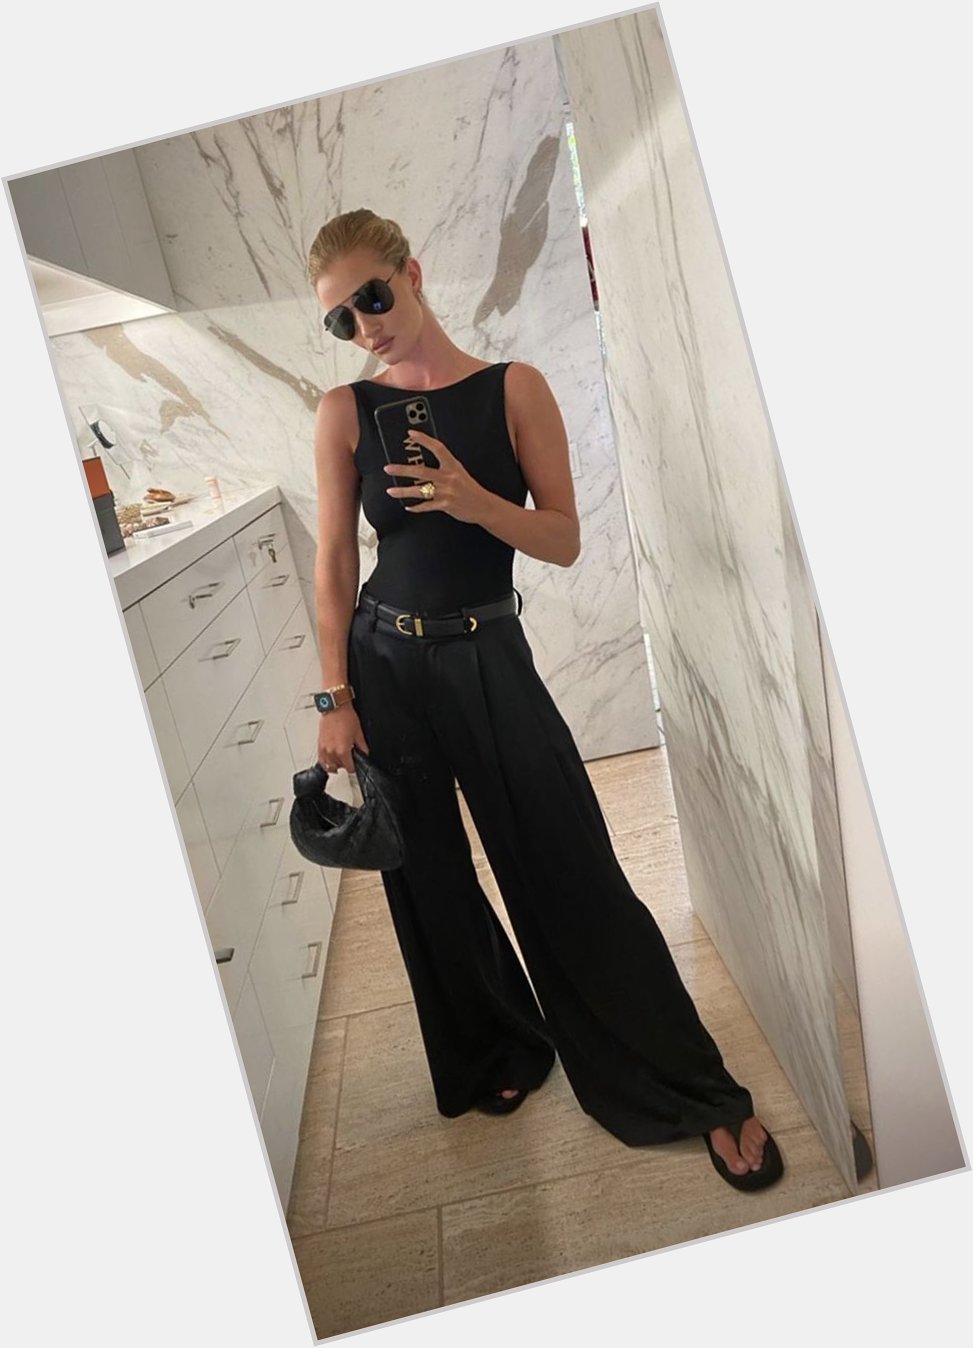 Happy birthday to  the queen of mirror selfies and one of the biggest milfs, rosie huntington-whiteley 